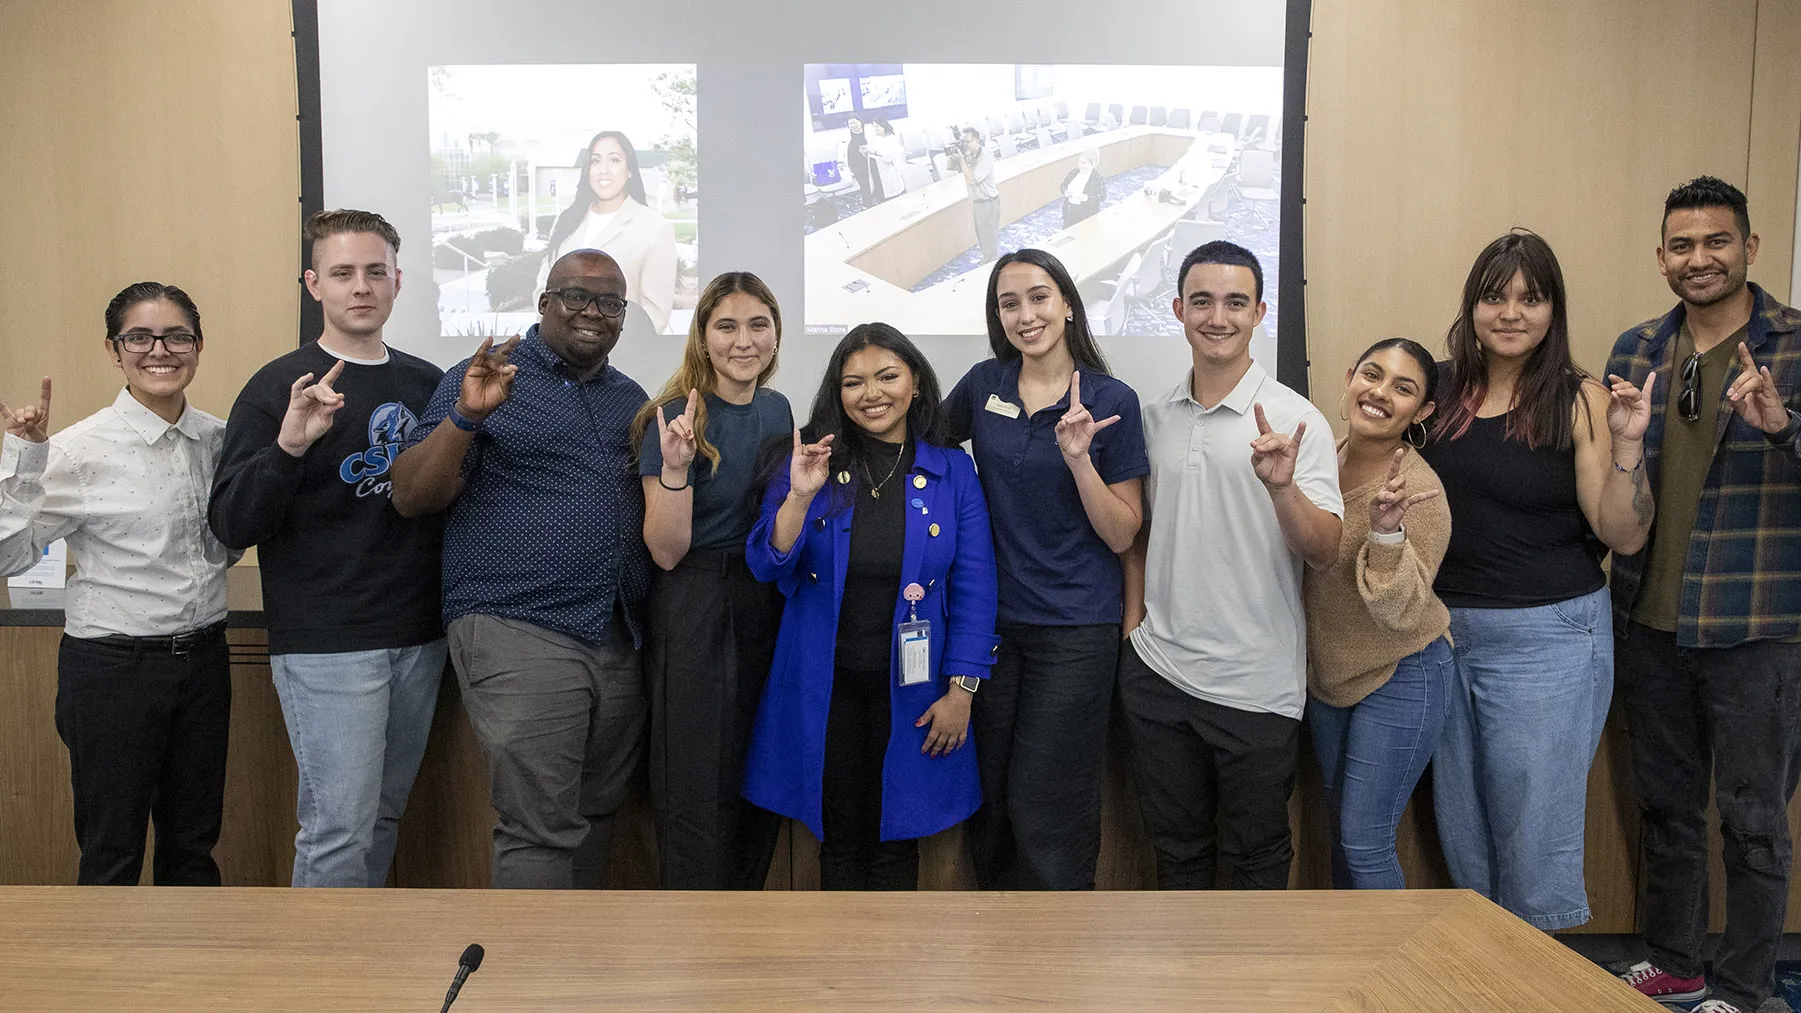 CSU Student Trustee Diana Aguilar-Cruz, center, in blue coat, shares some Coyote Pride with CSUSB ASI officers.